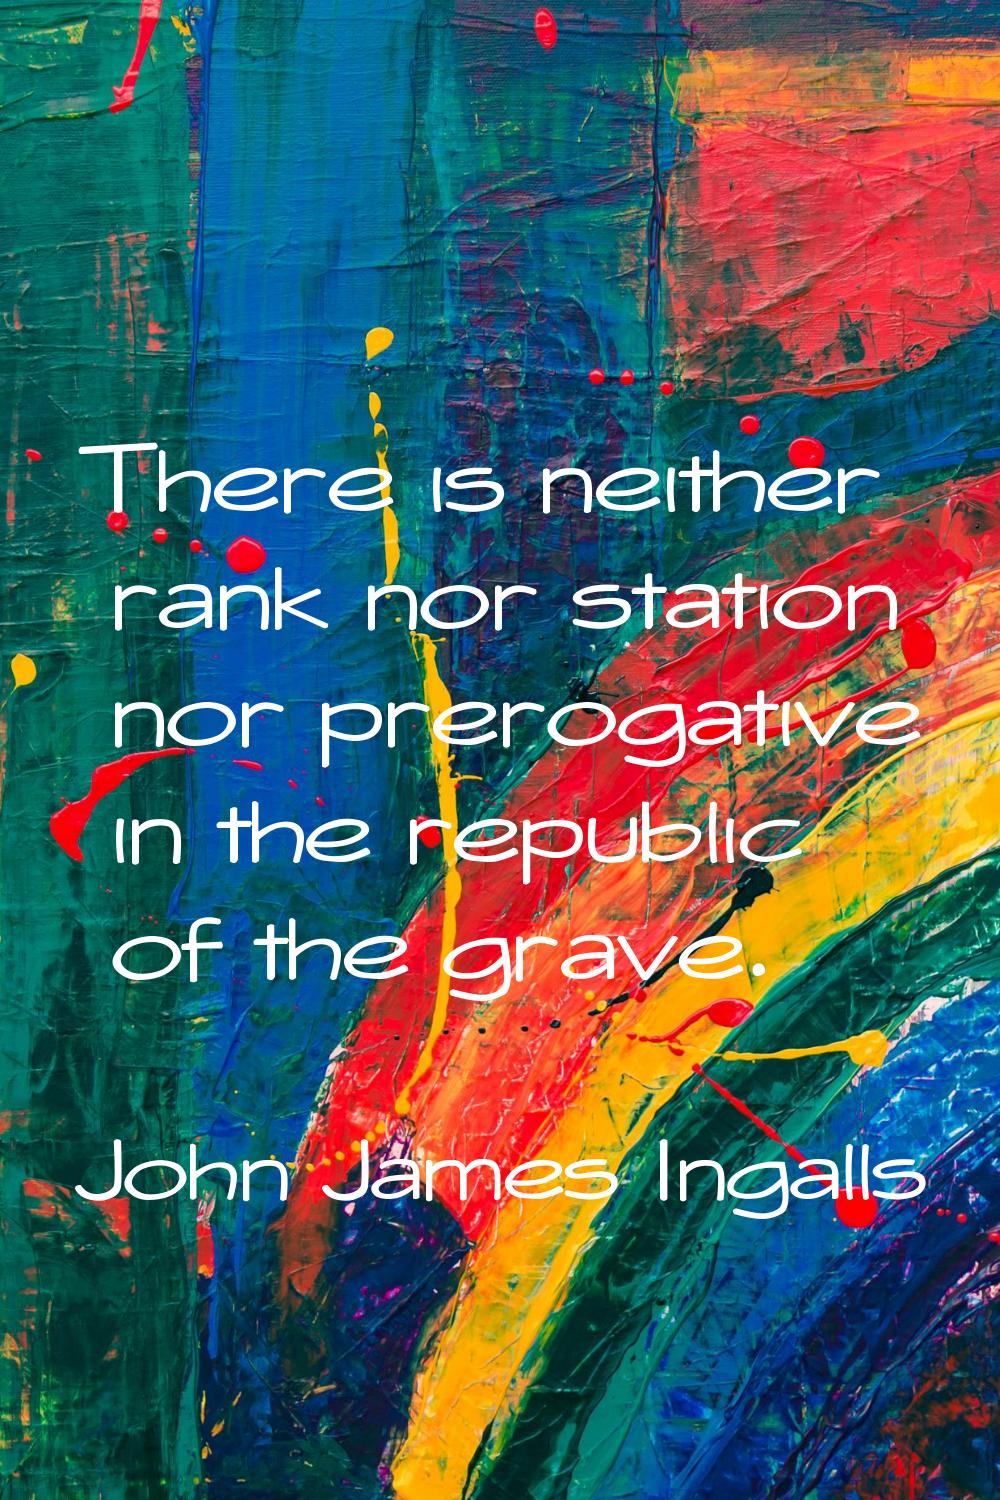 There is neither rank nor station nor prerogative in the republic of the grave.